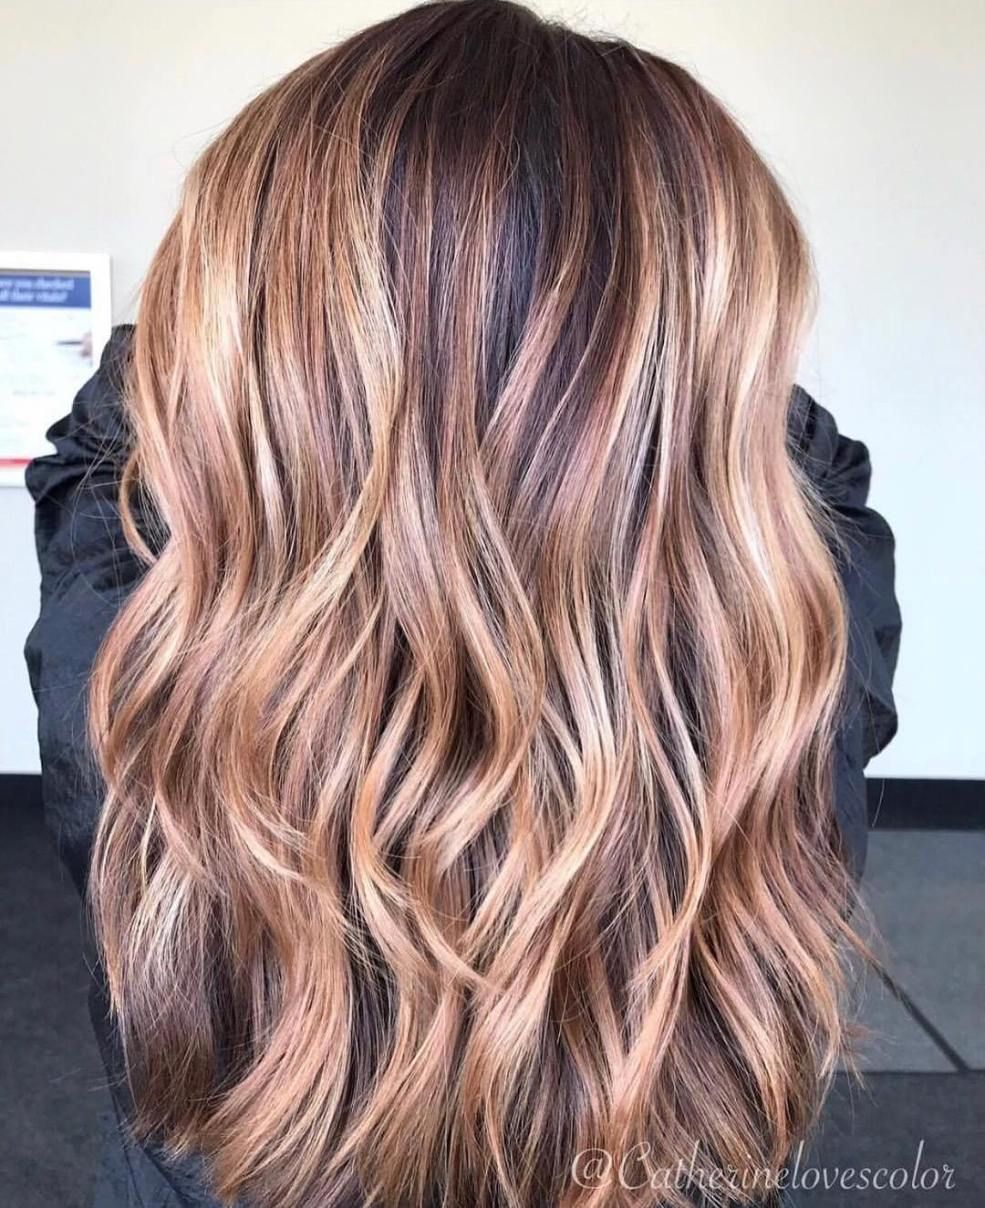 caramel brown and blonde highlights